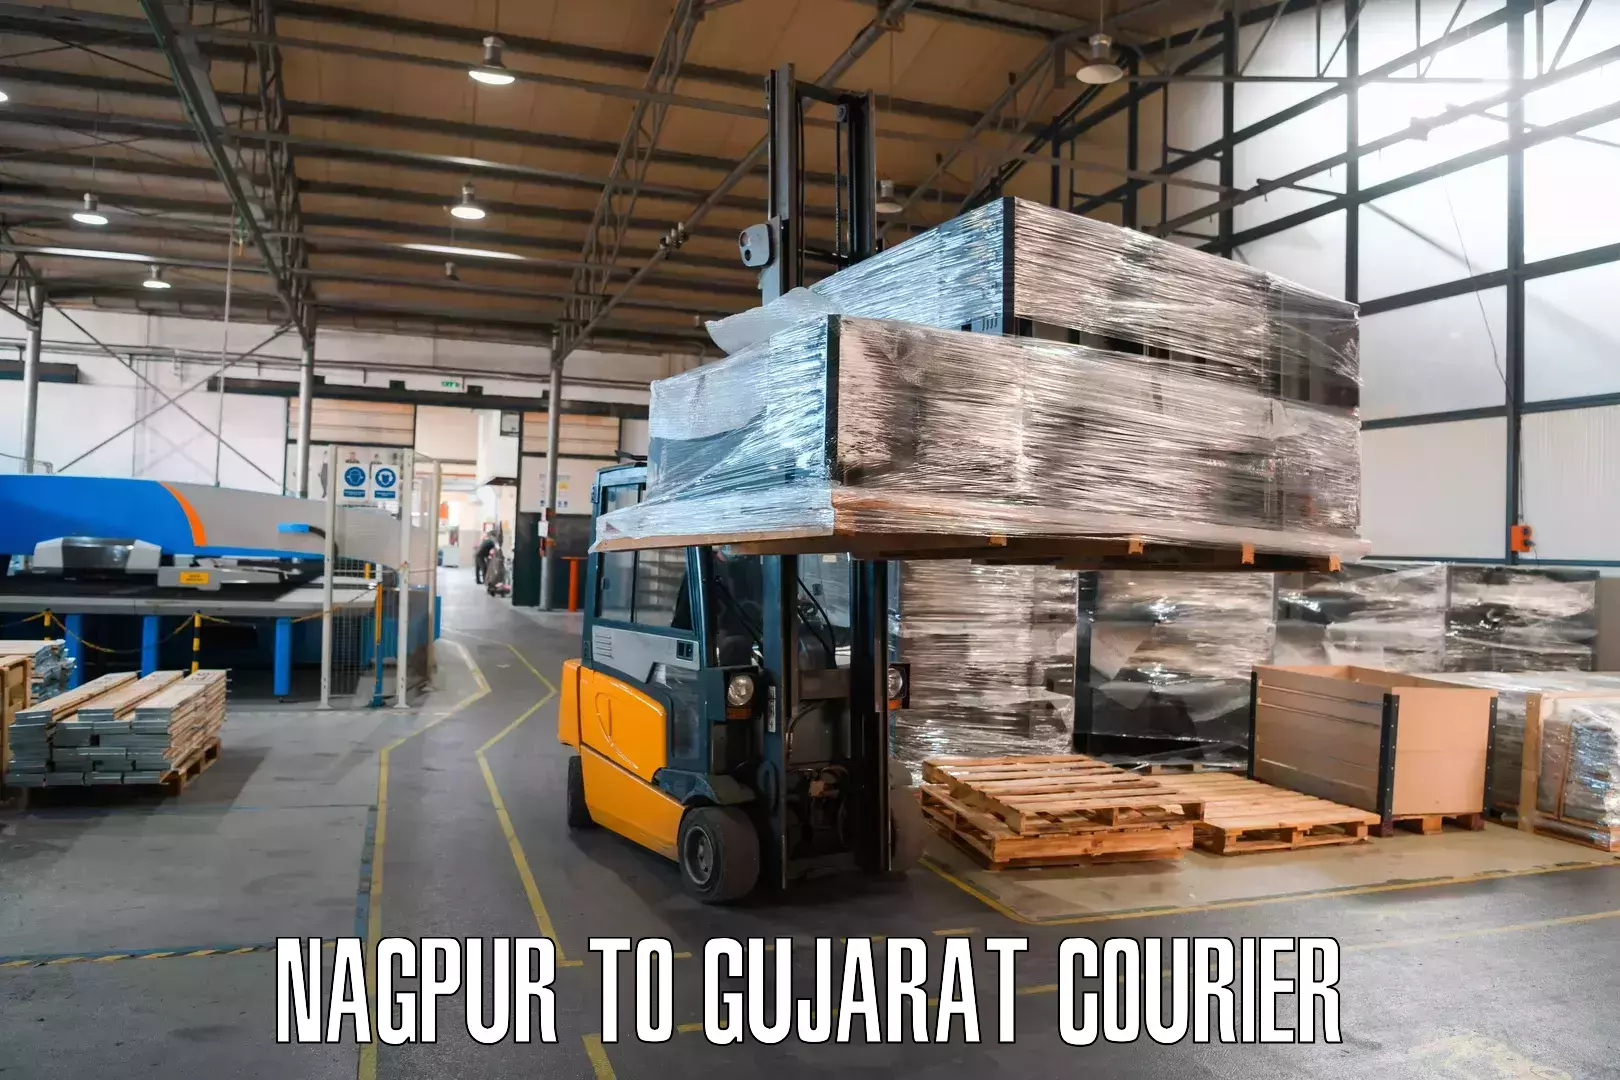 Comprehensive shipping network Nagpur to Veraval